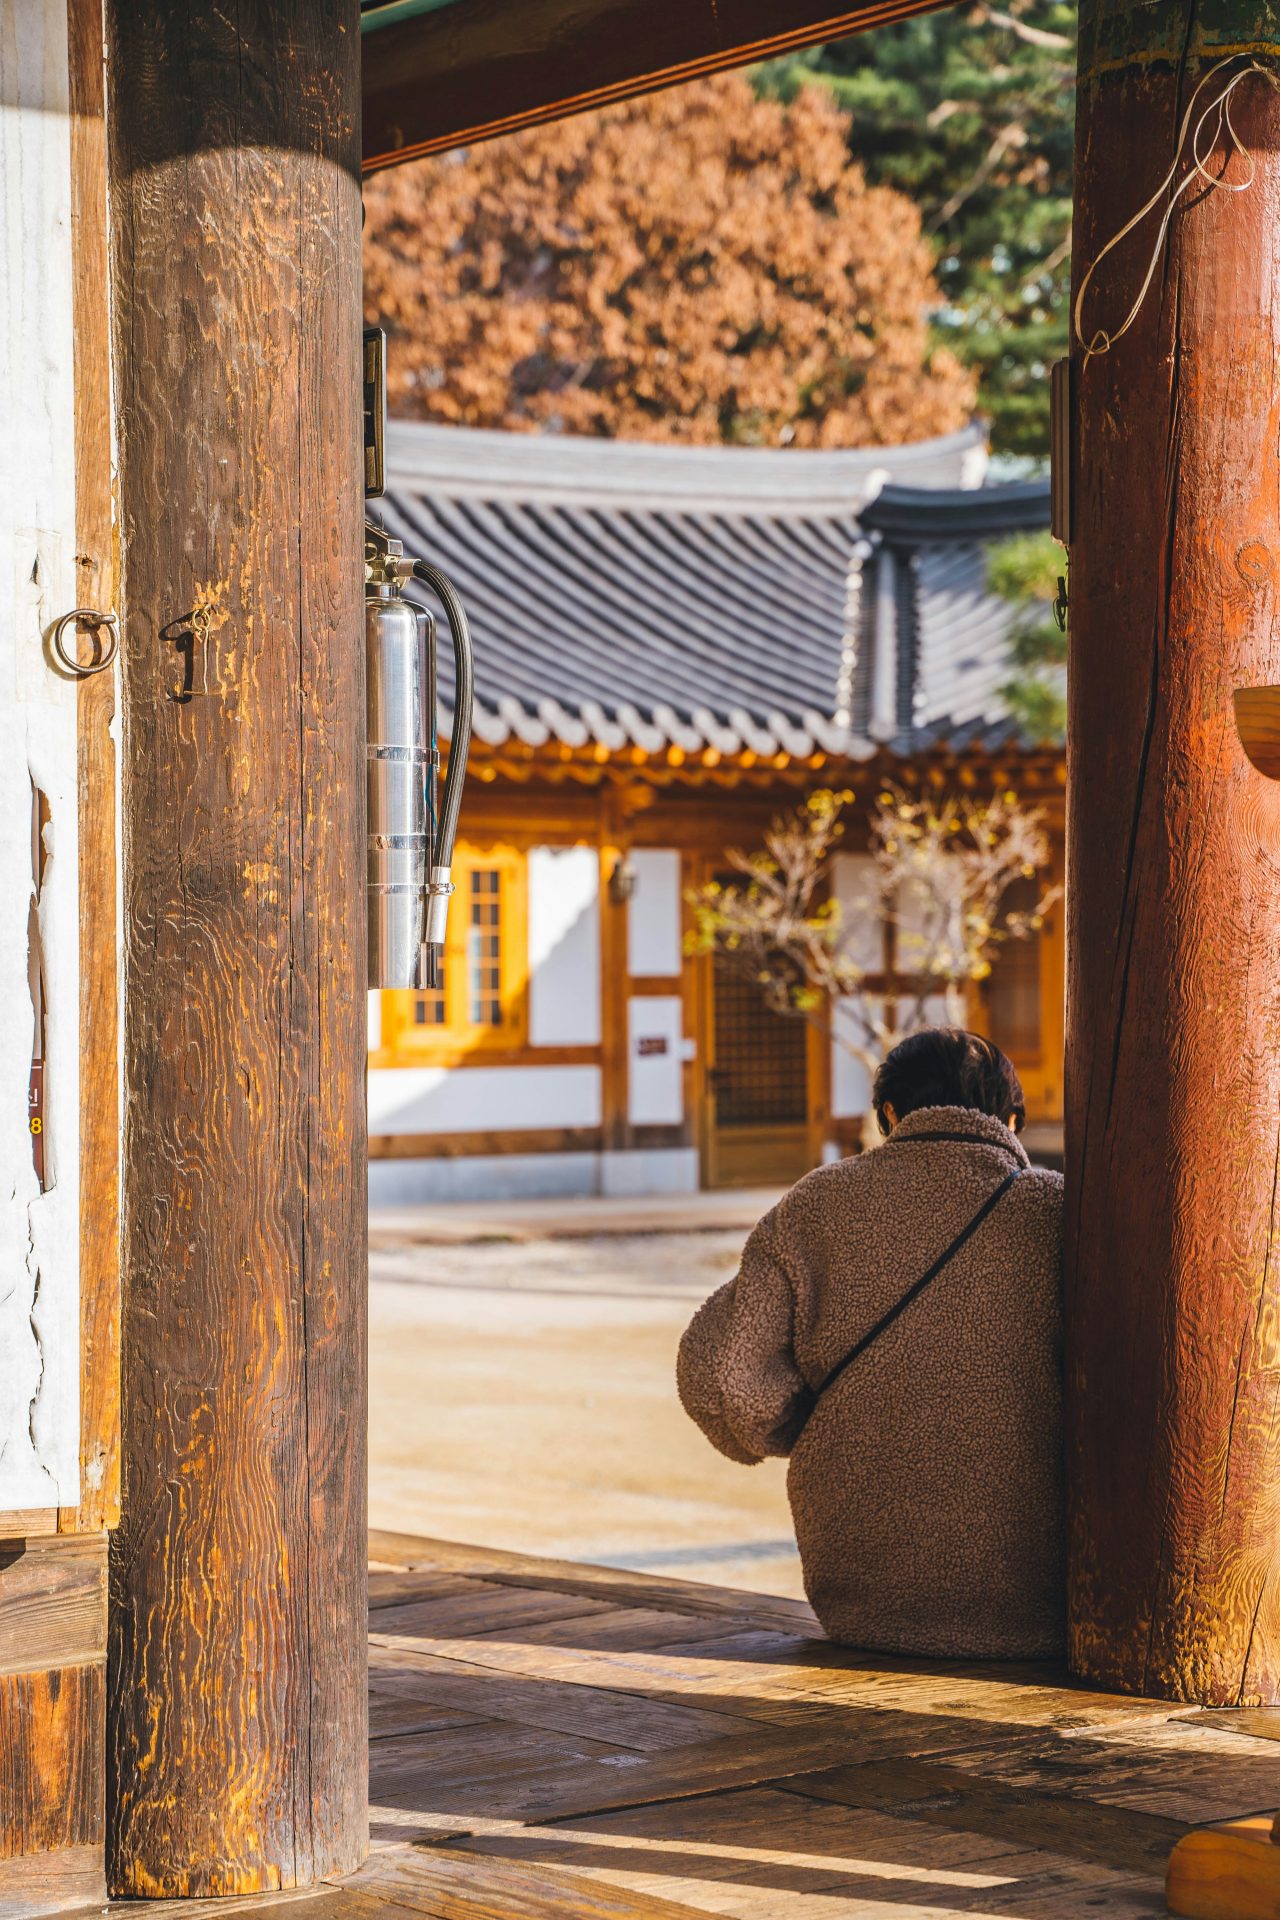 <p>Some programs let you experience the life of a monk, zazen meditation, and the tea ceremony, making it popular with domestic and international tourists.</p> <p>Image: Roméo A / Unsplash</p>